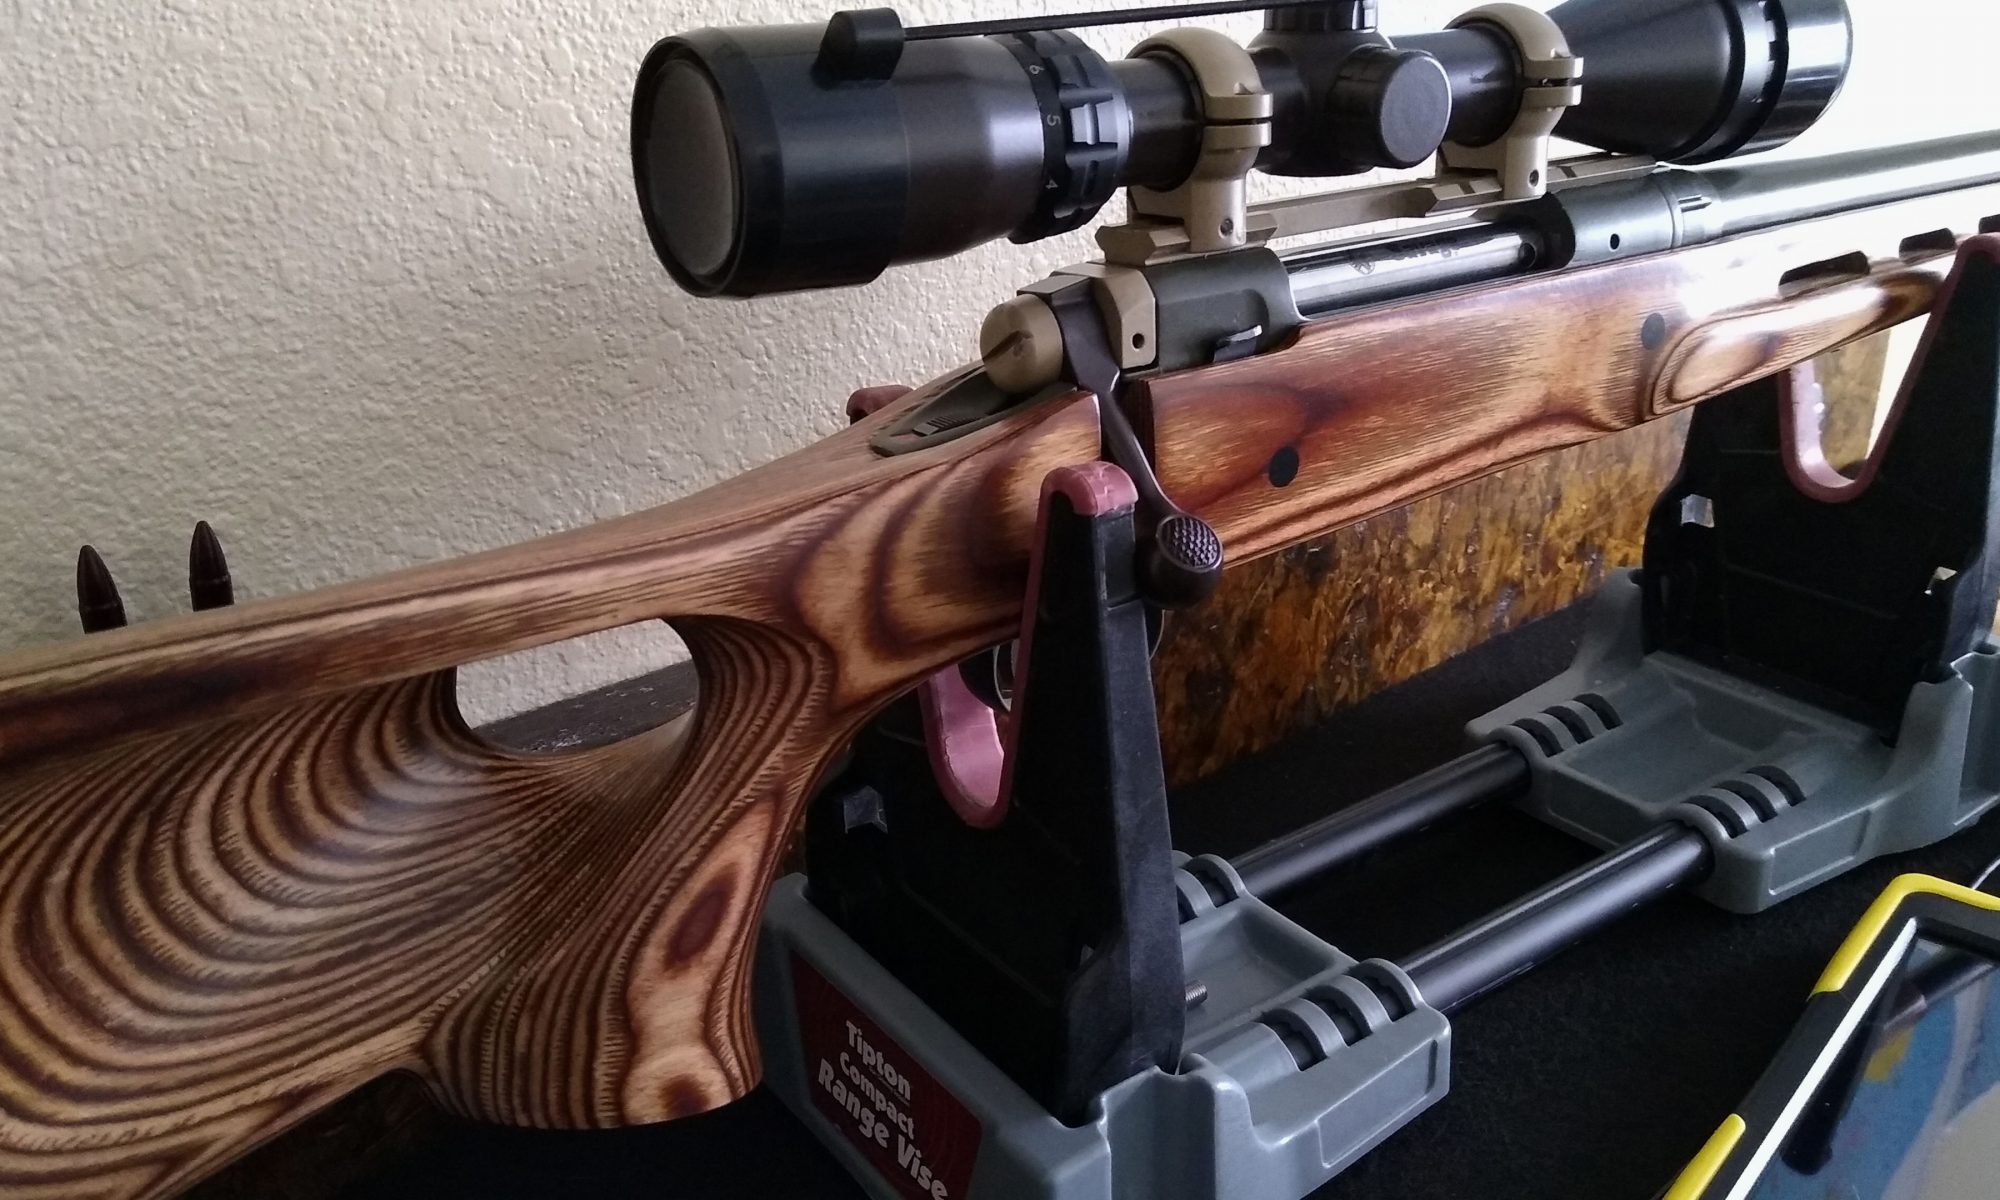 Savage rifle with painted metalwork and scope